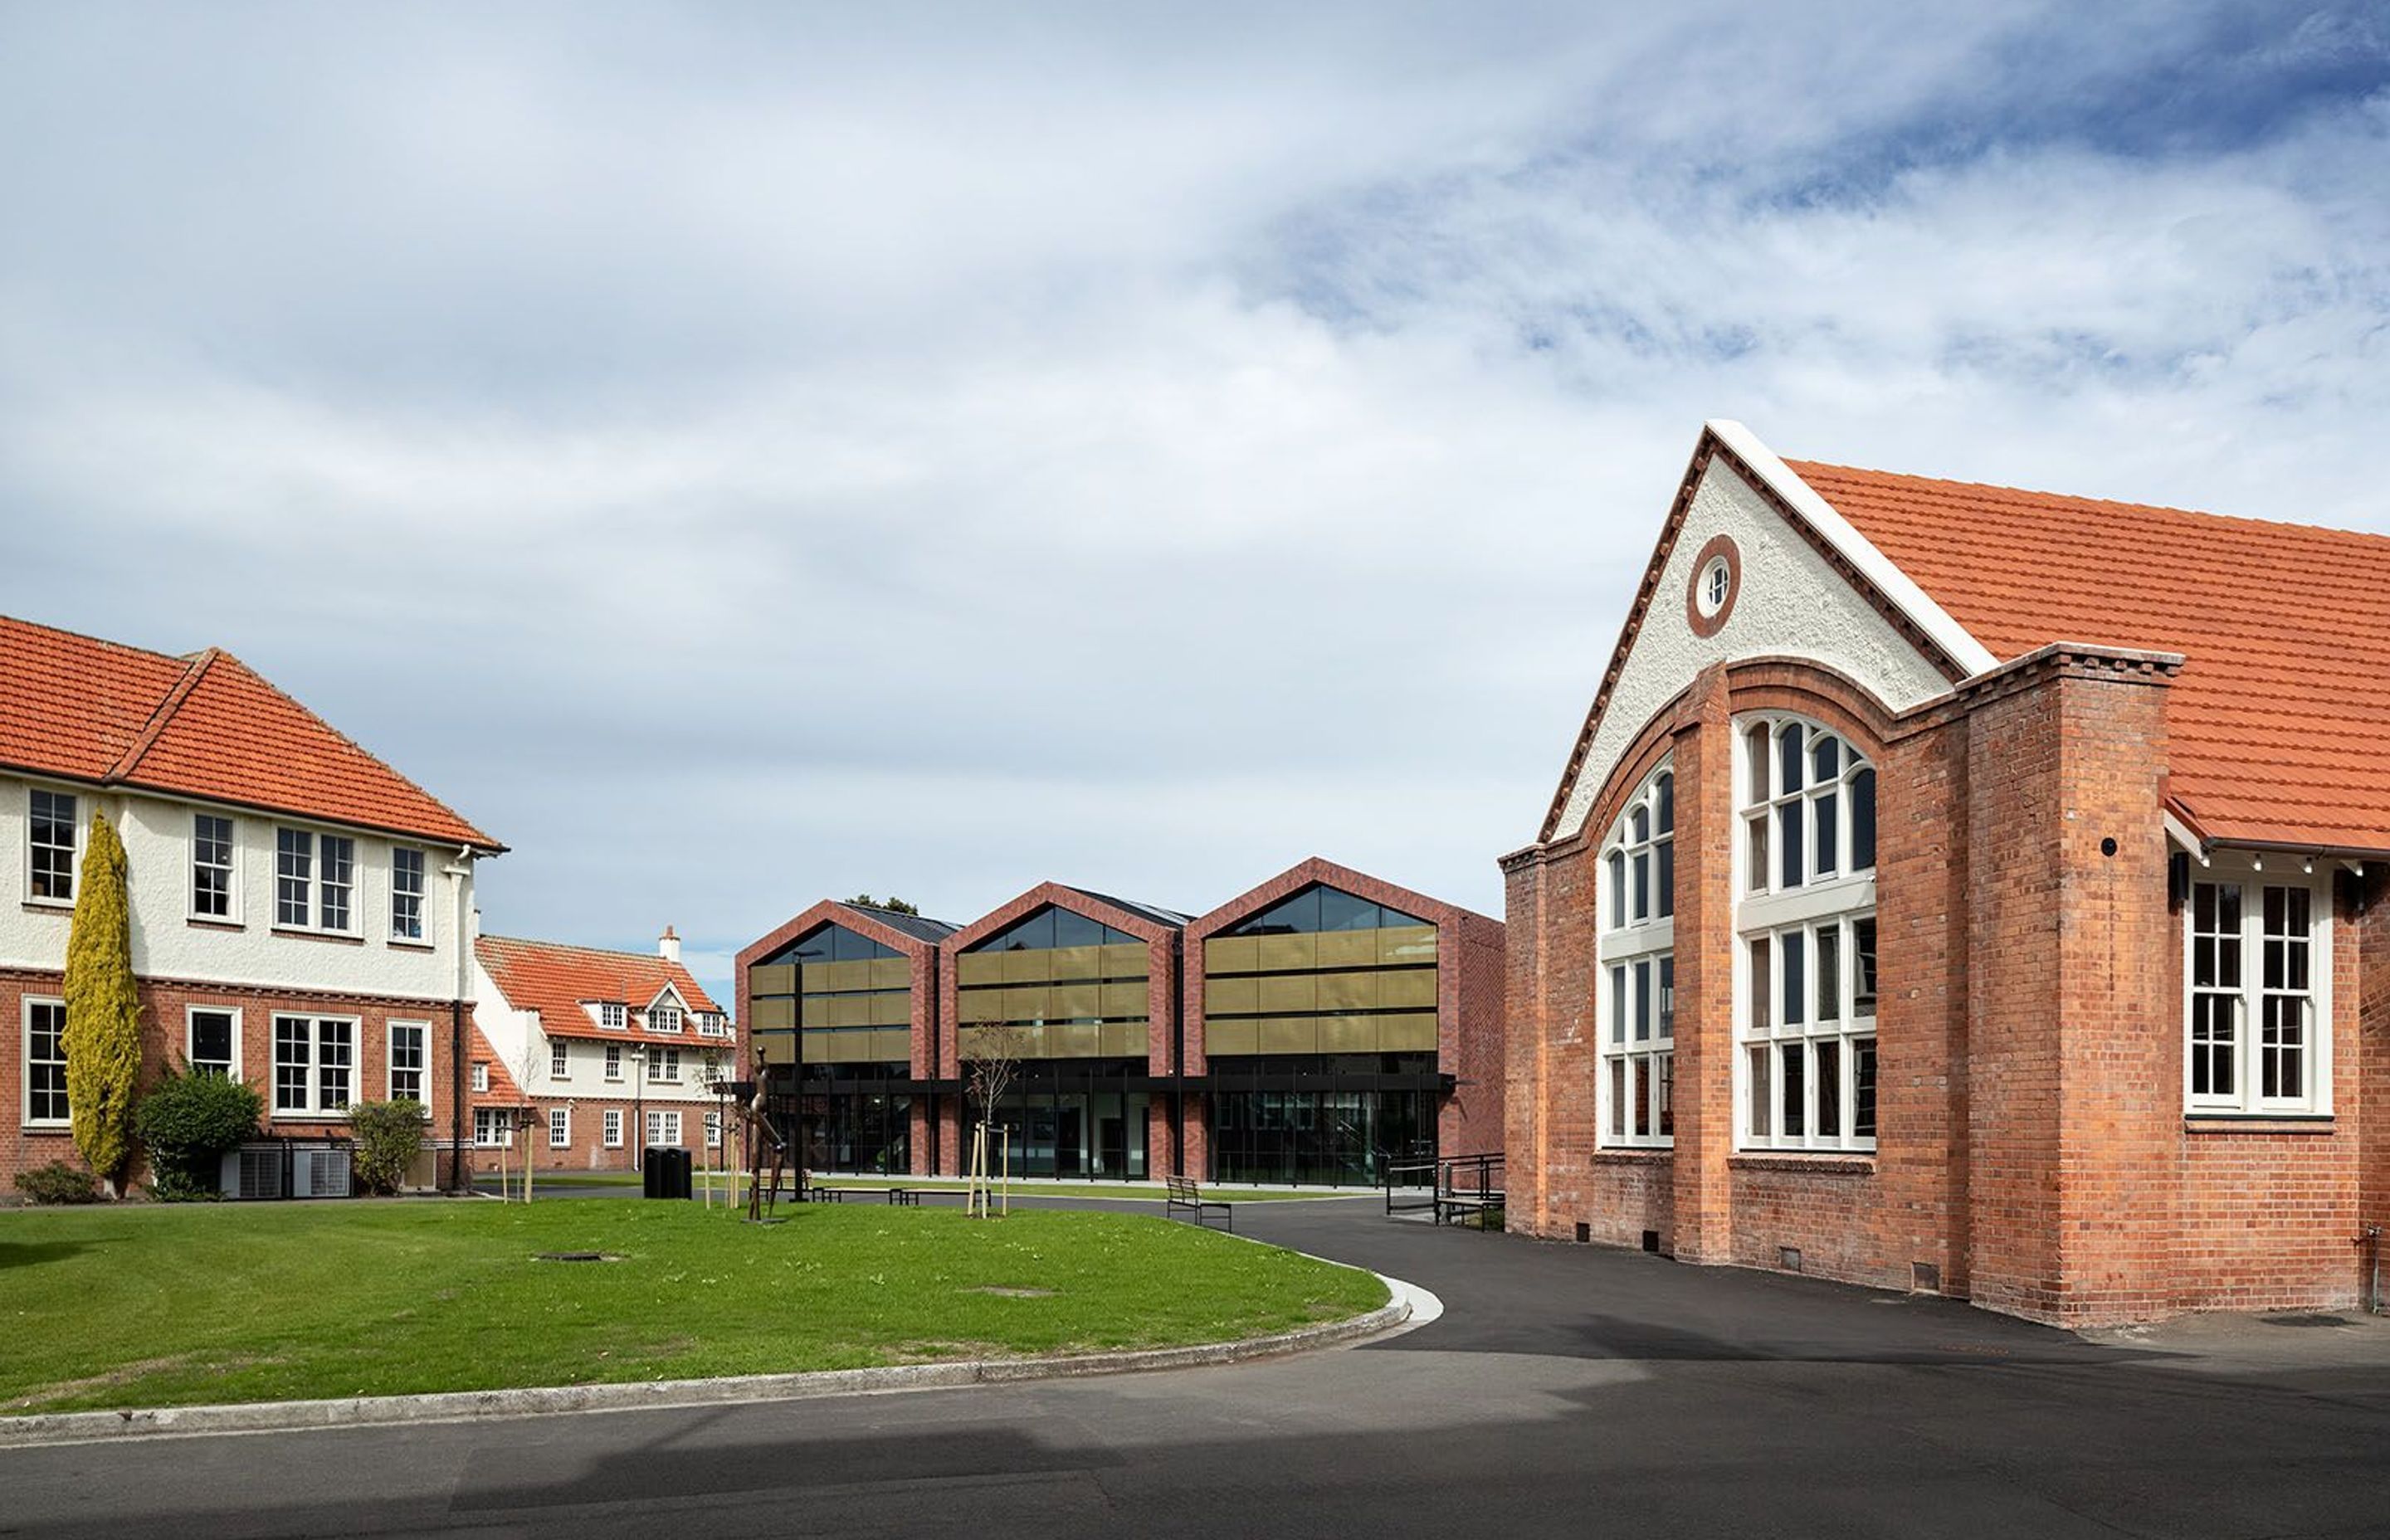 The triple-gabled brick roof form on the new Administration Building refers to the gables on the existing heritage buildings.